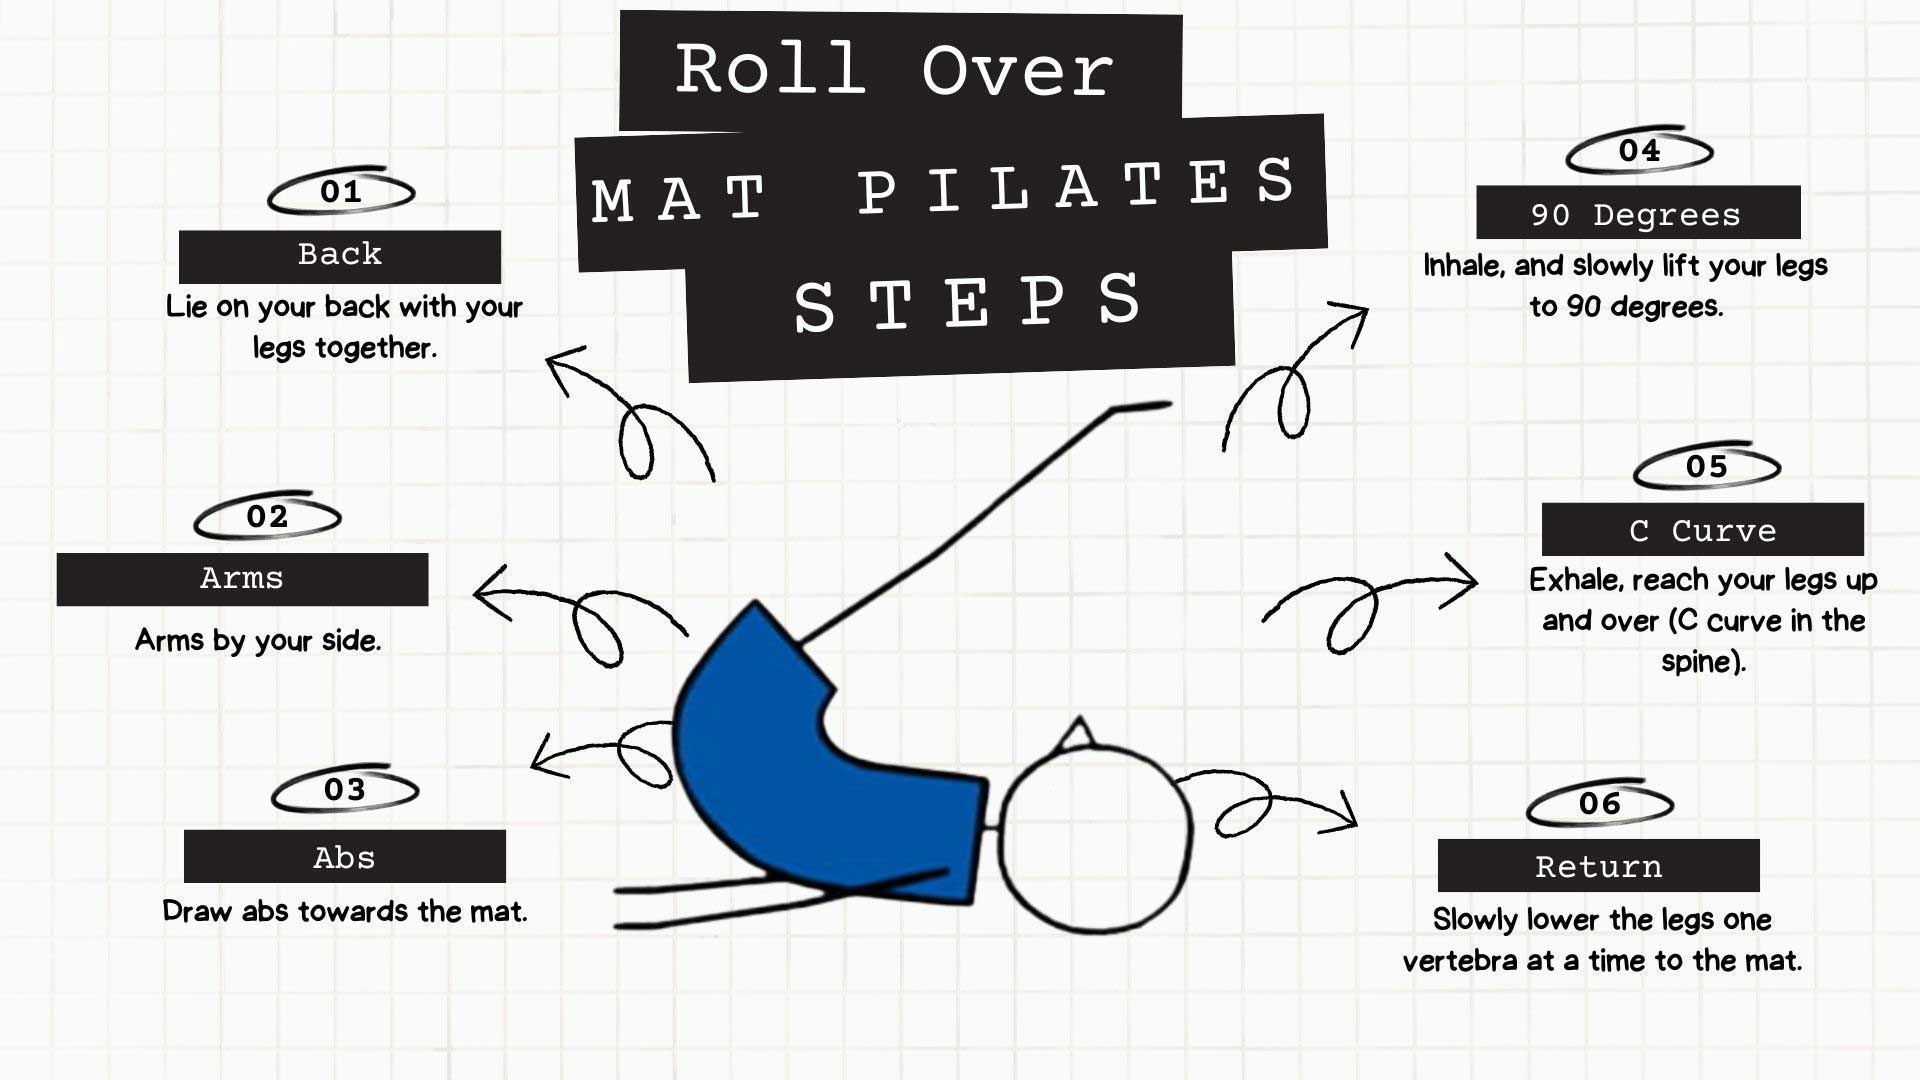 Roll Over Pilates Steps Infographic